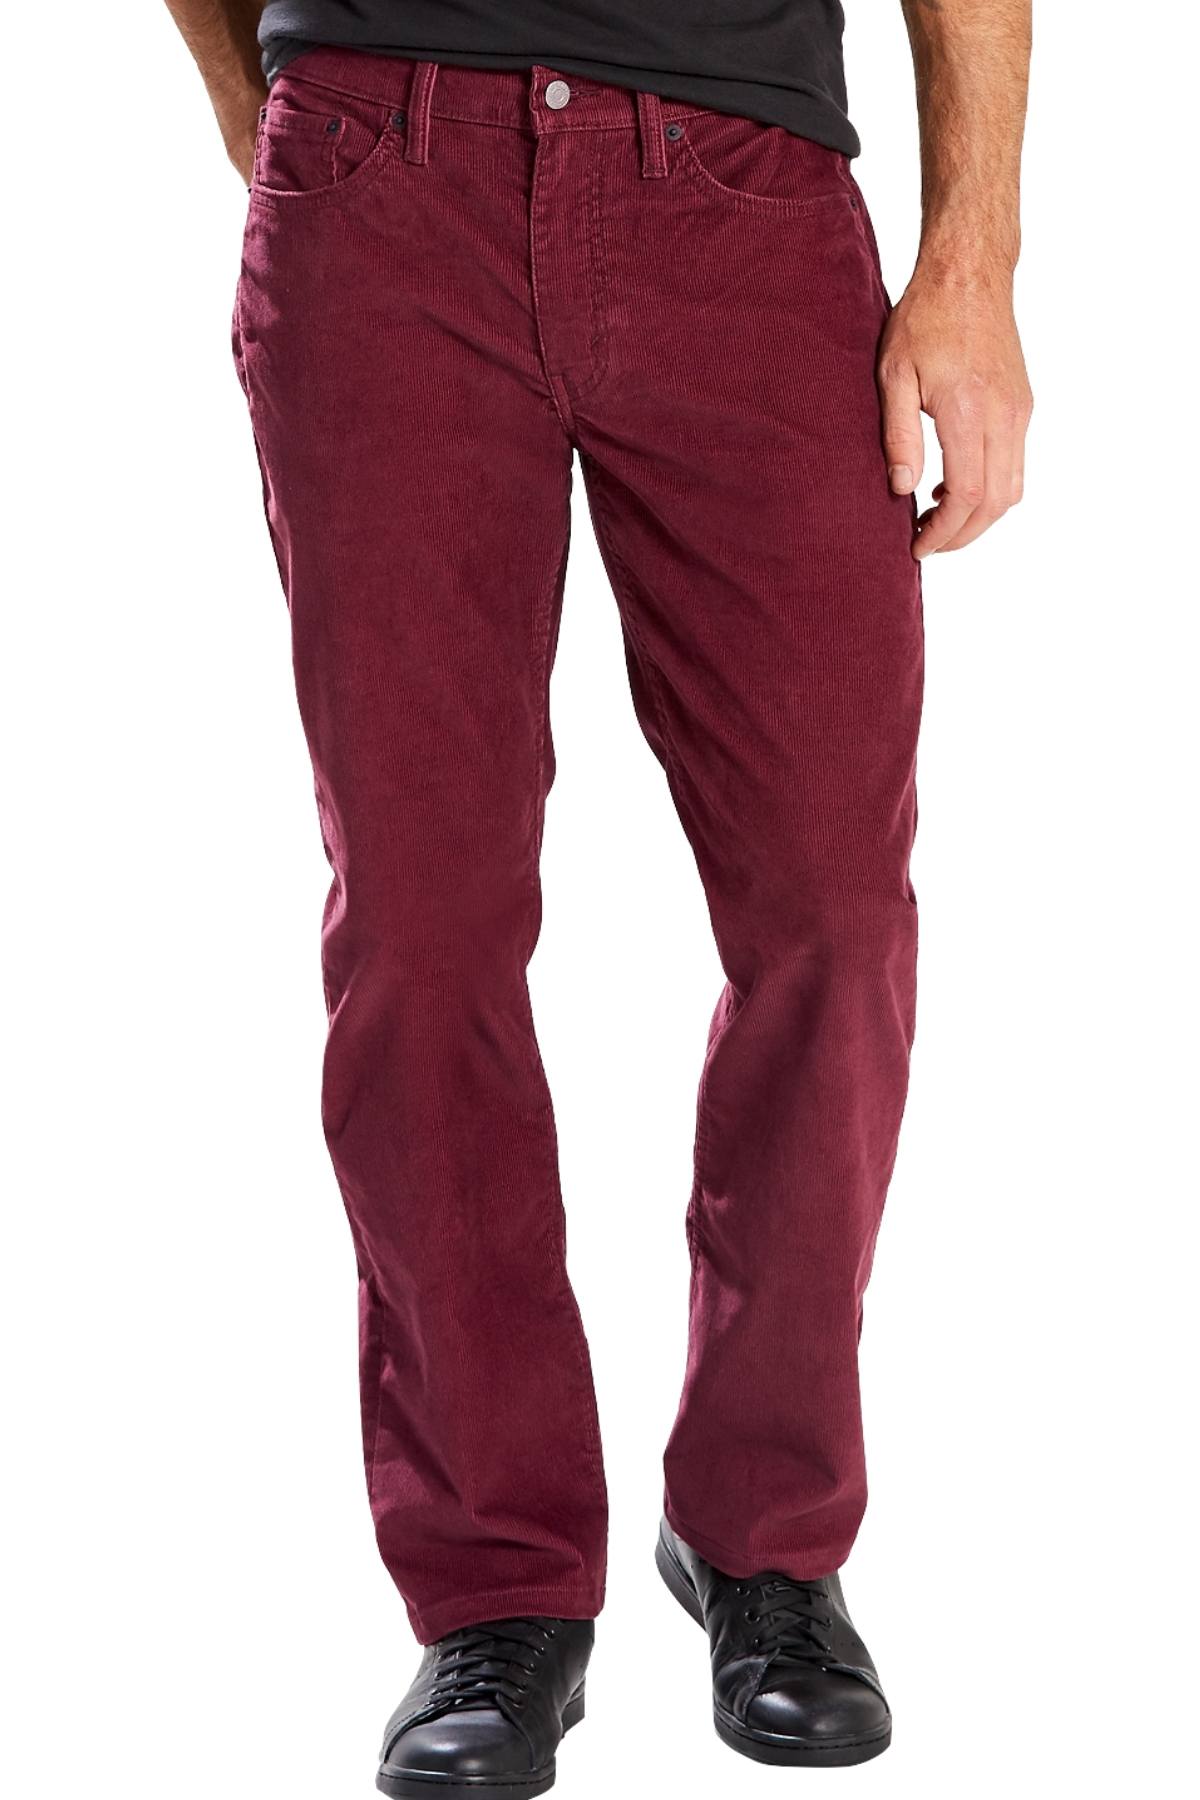 1970s Burgundy Levi Corduroy Pants Selected by Grievous Angel